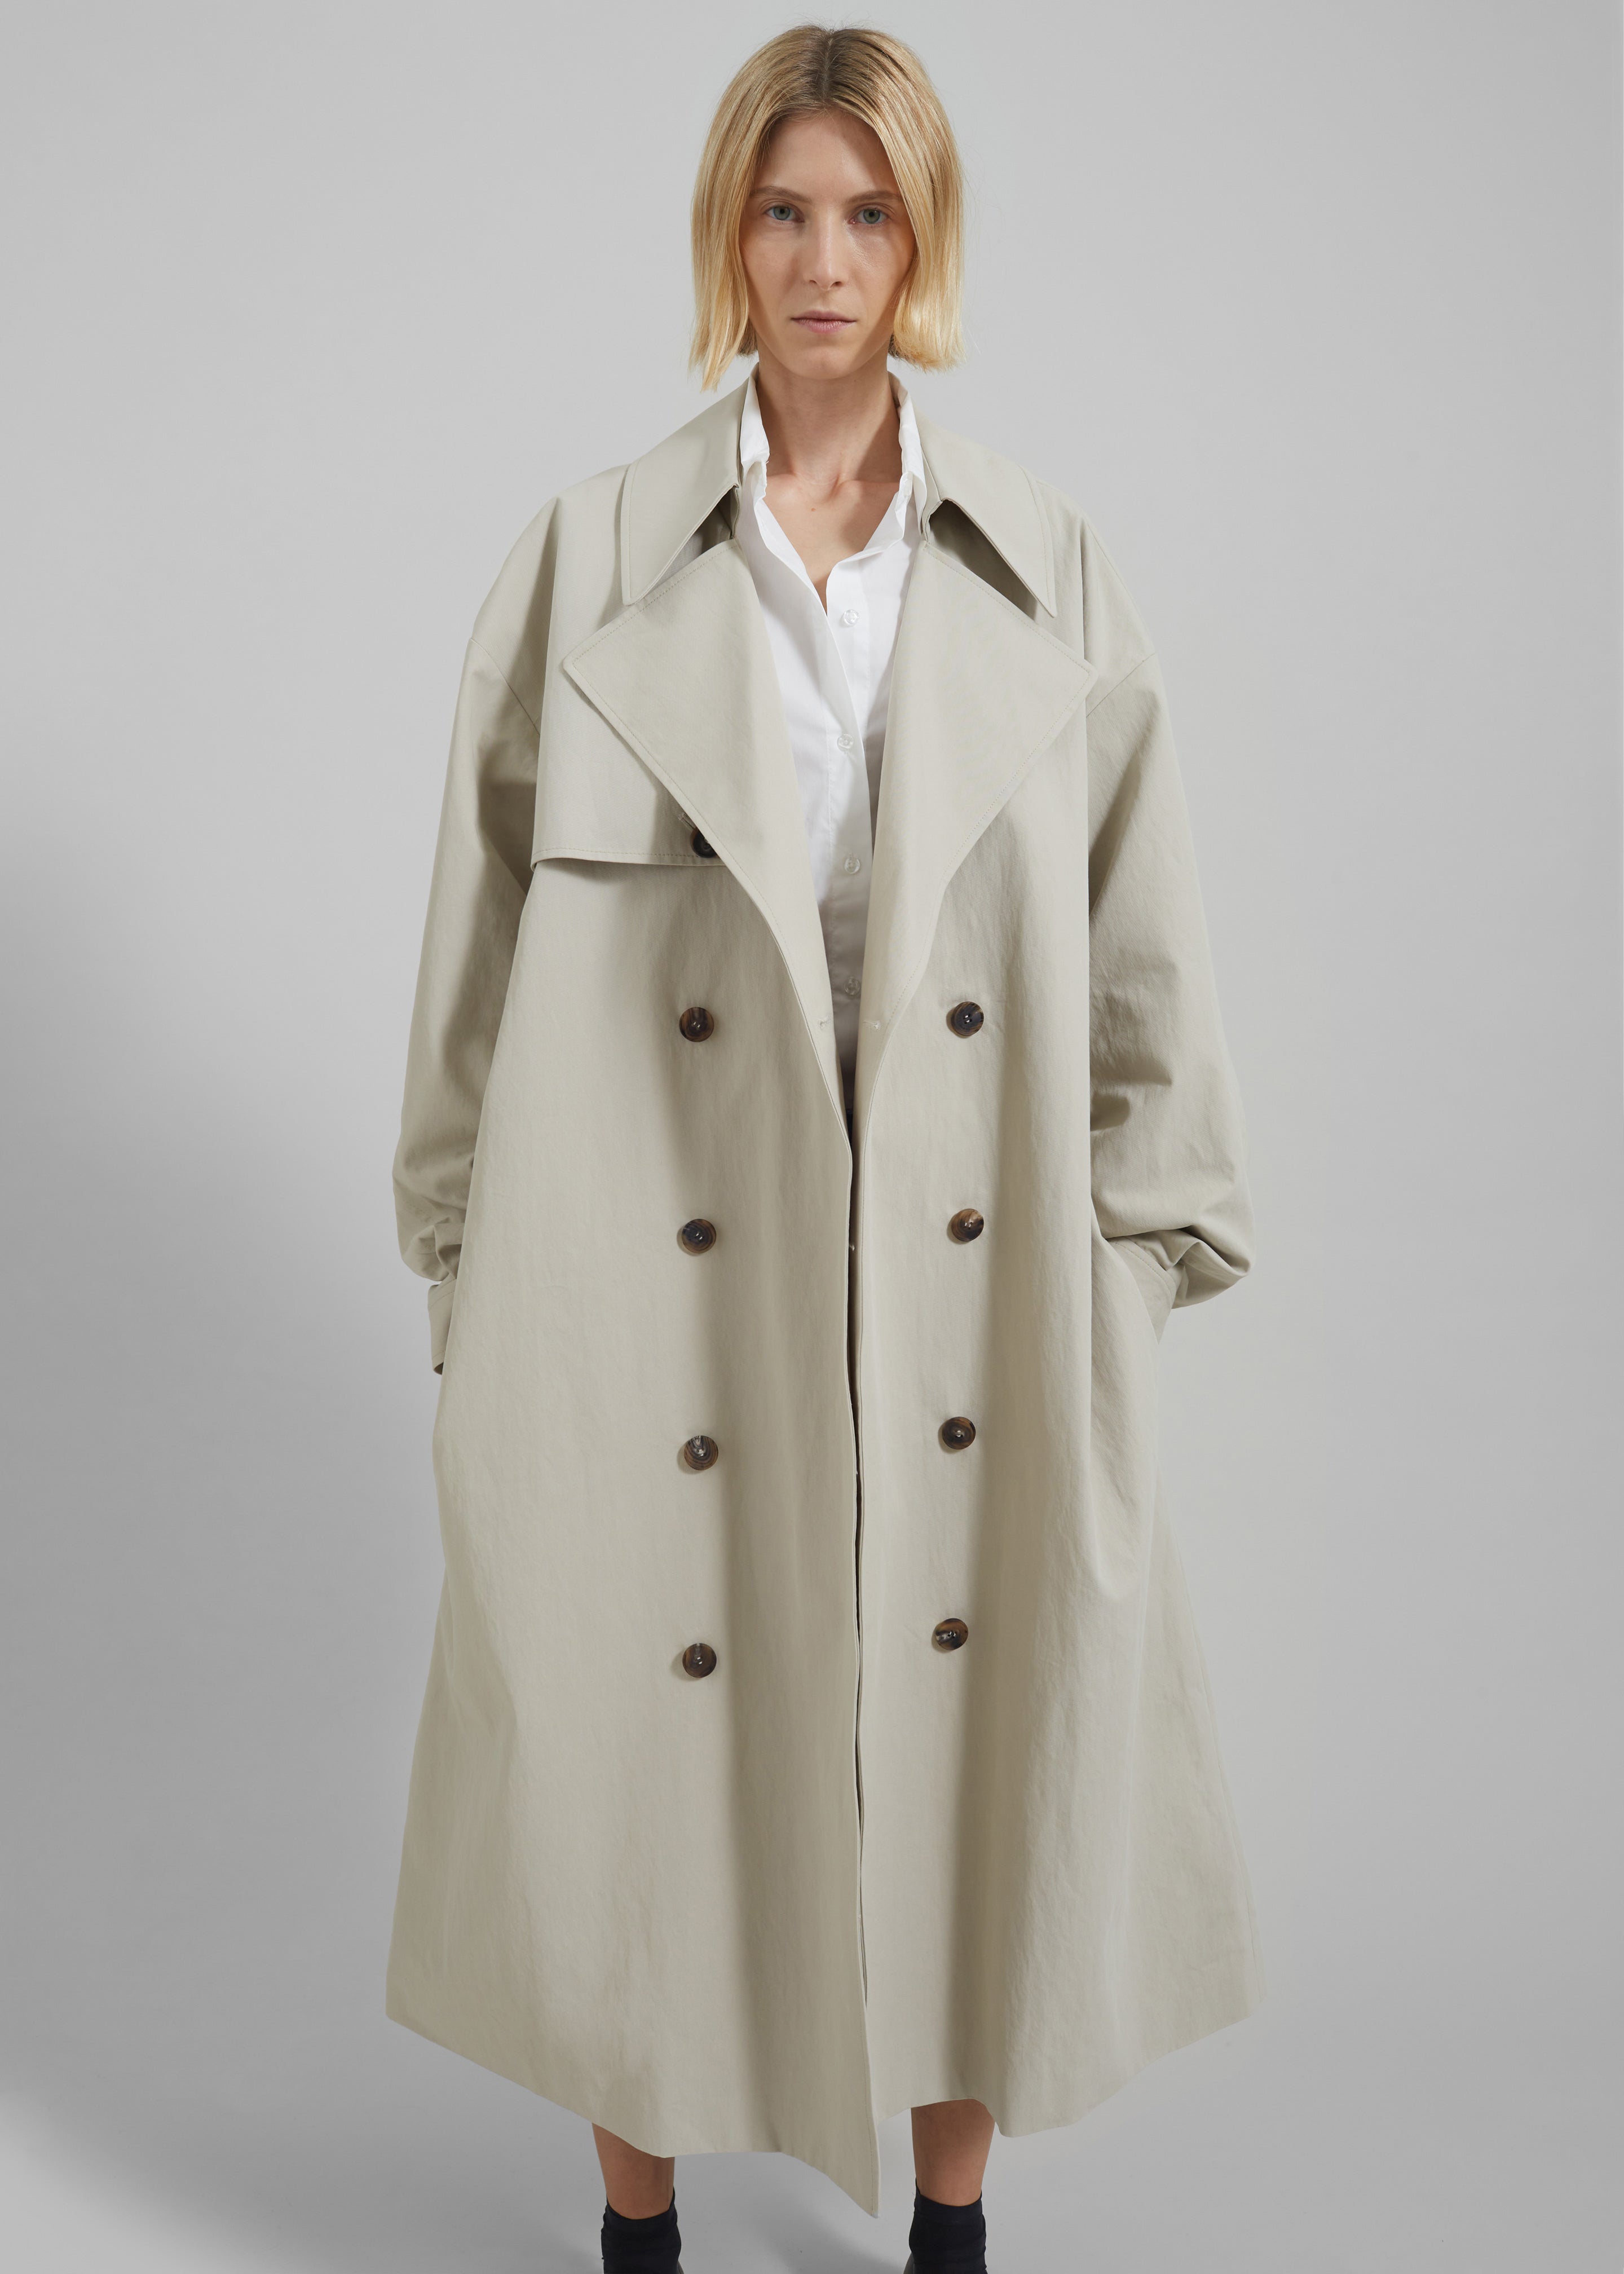 Anika Double Breasted Trench Coat - Beige - 5